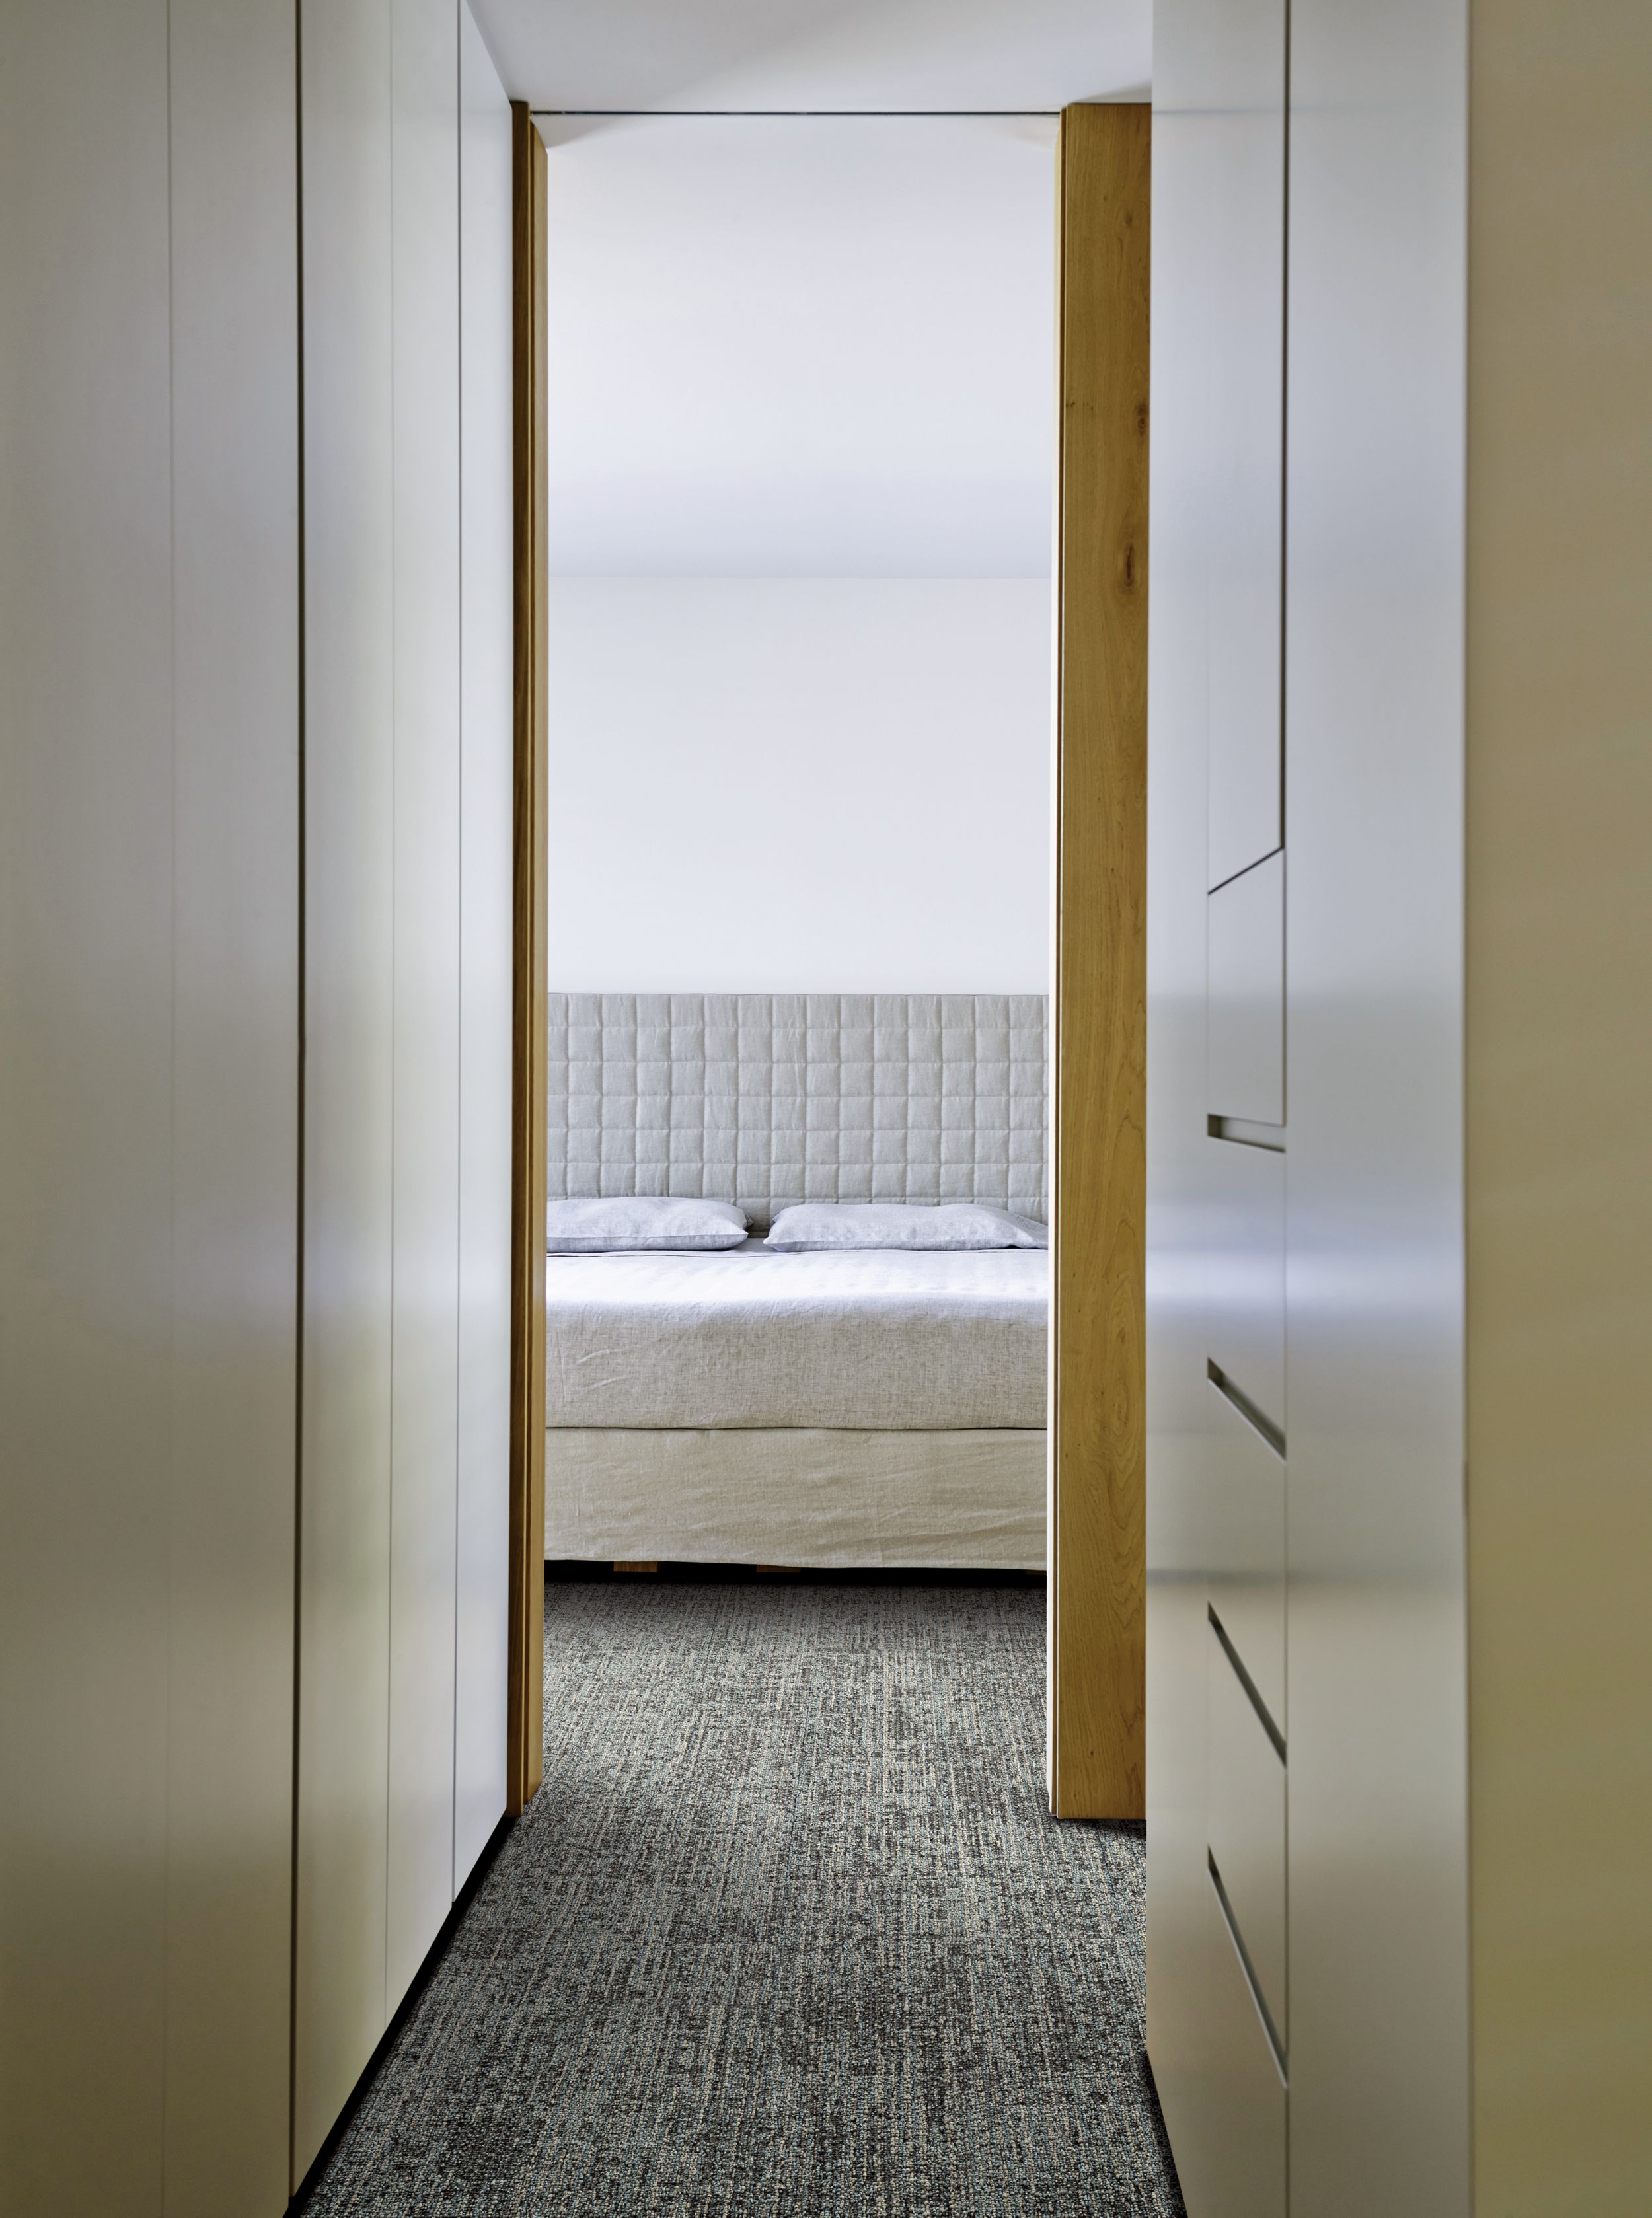 Narrow view off Interface RMS 511 plank carpet tile in hotel guest room imagen número 1